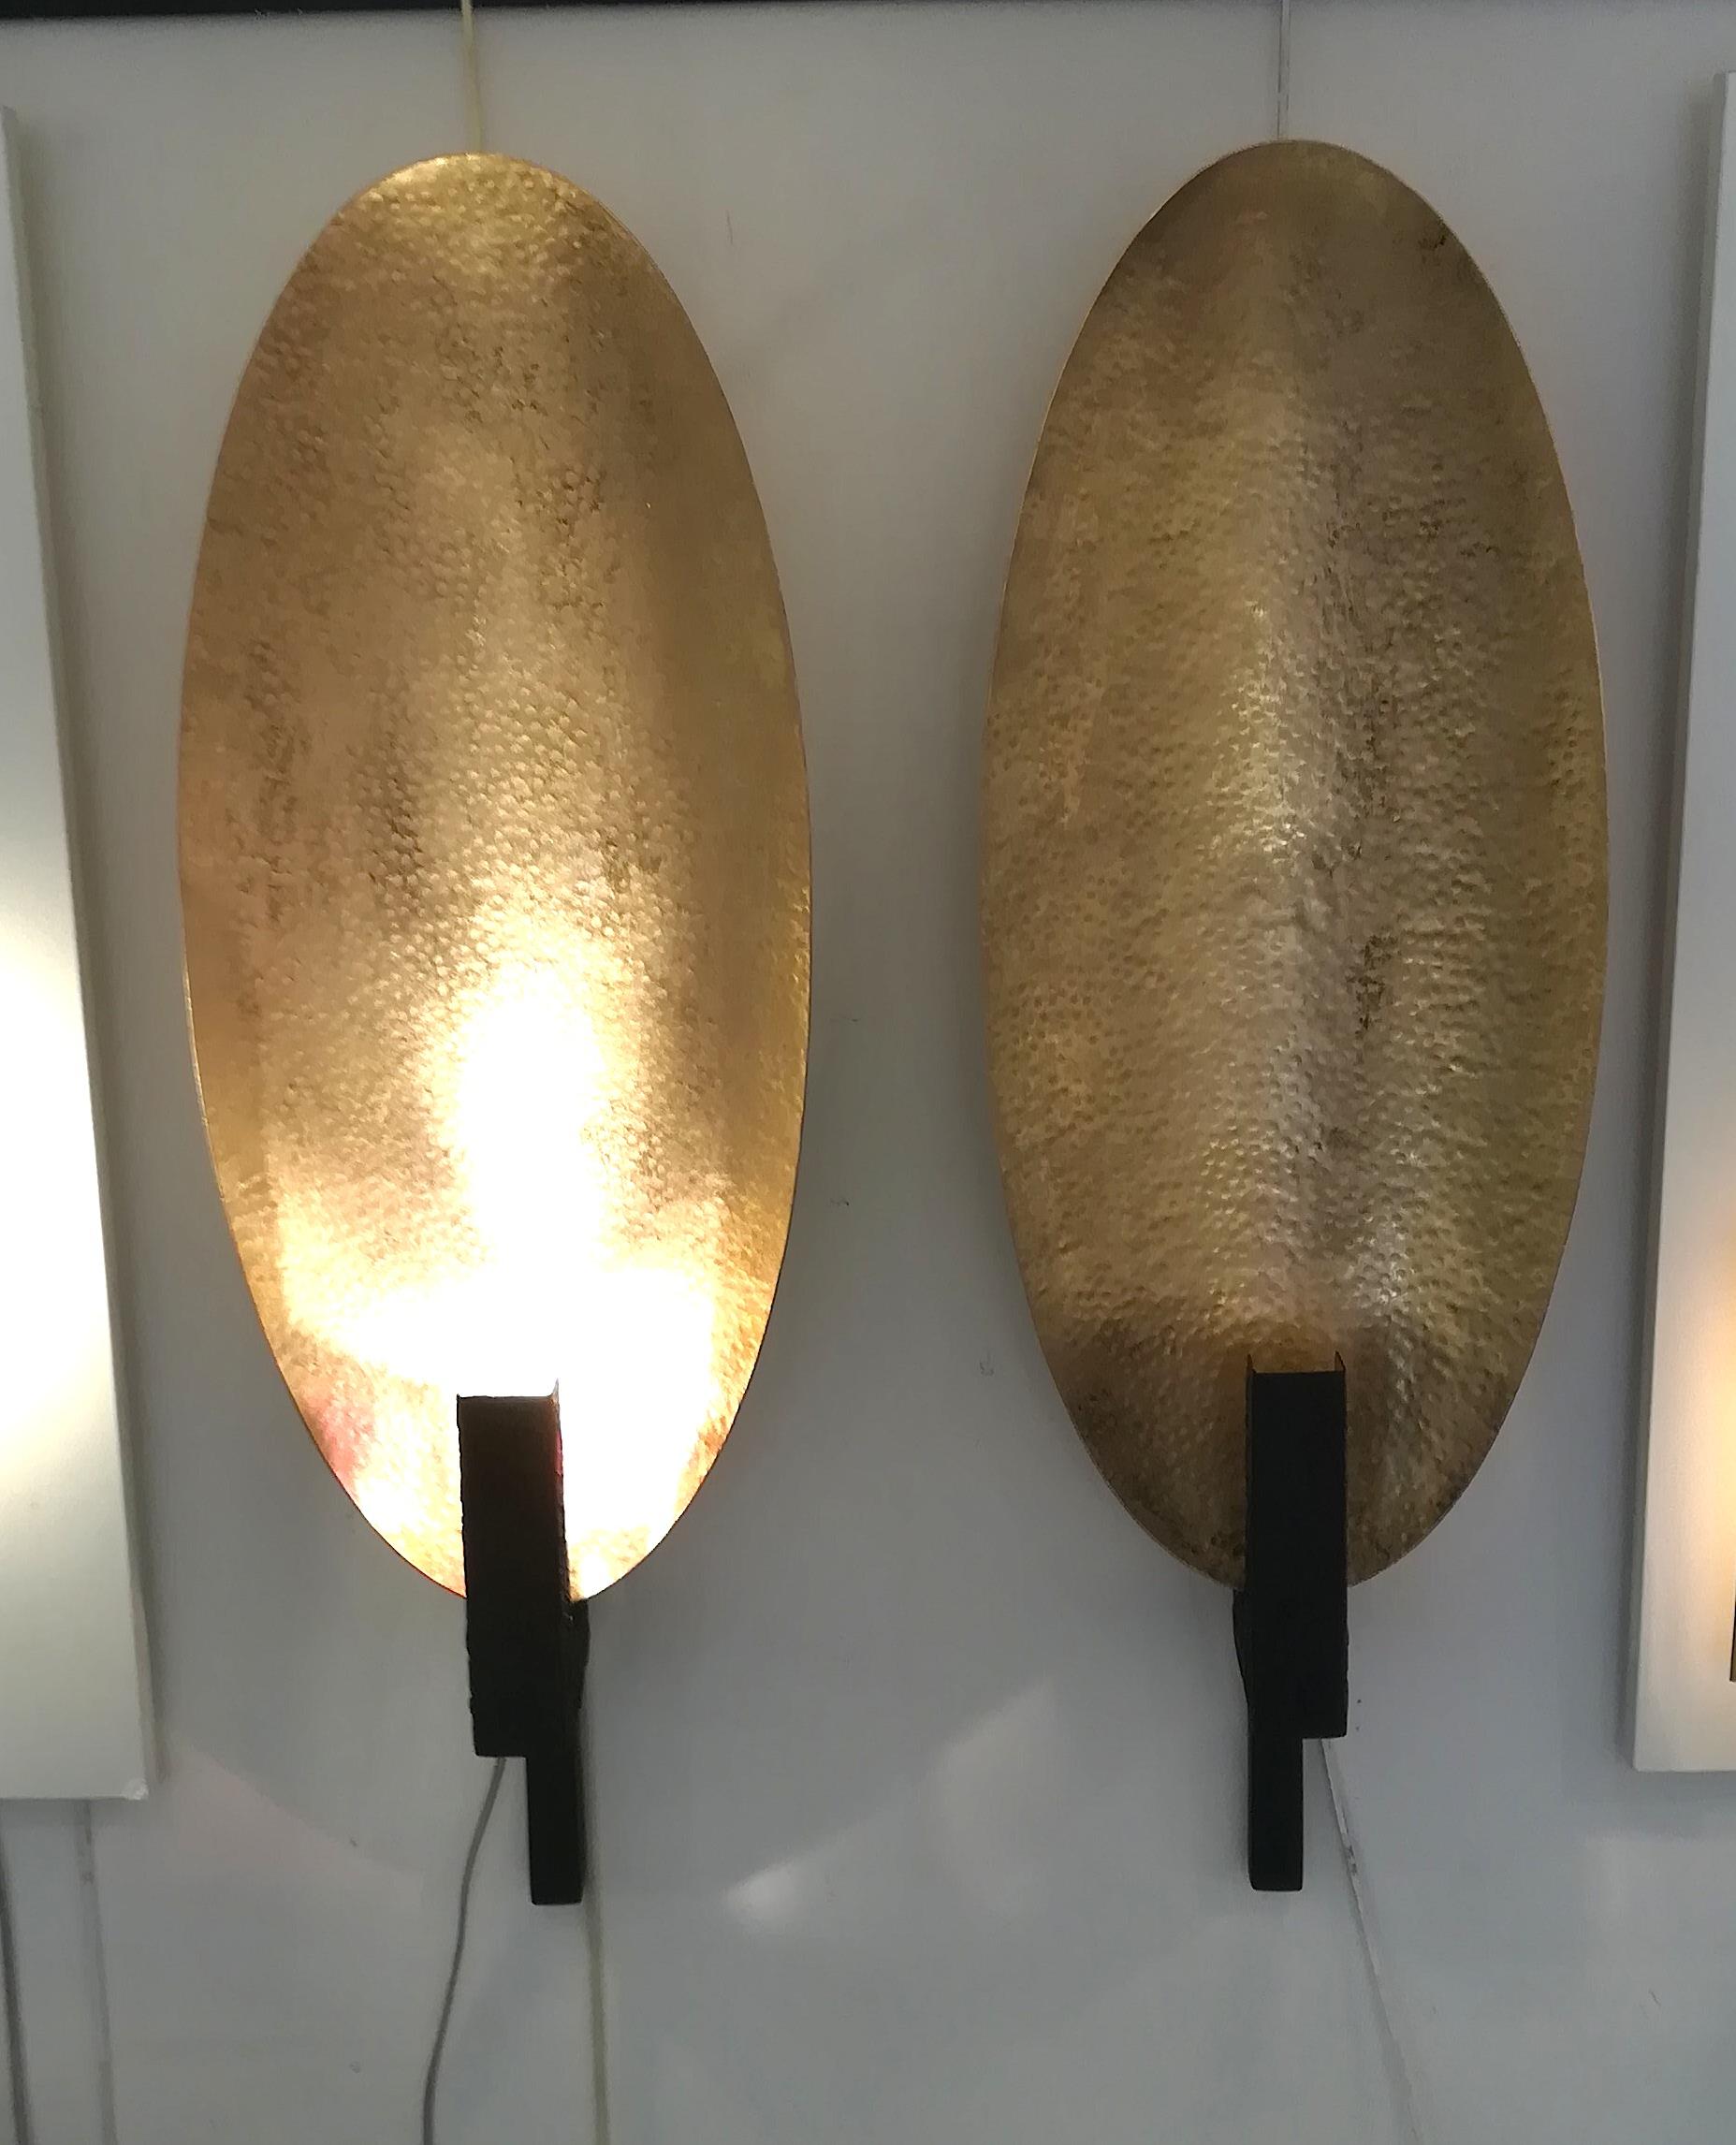 Pair of brass and black painted metal Ovale sconces.
(Can be sold separately upon request).